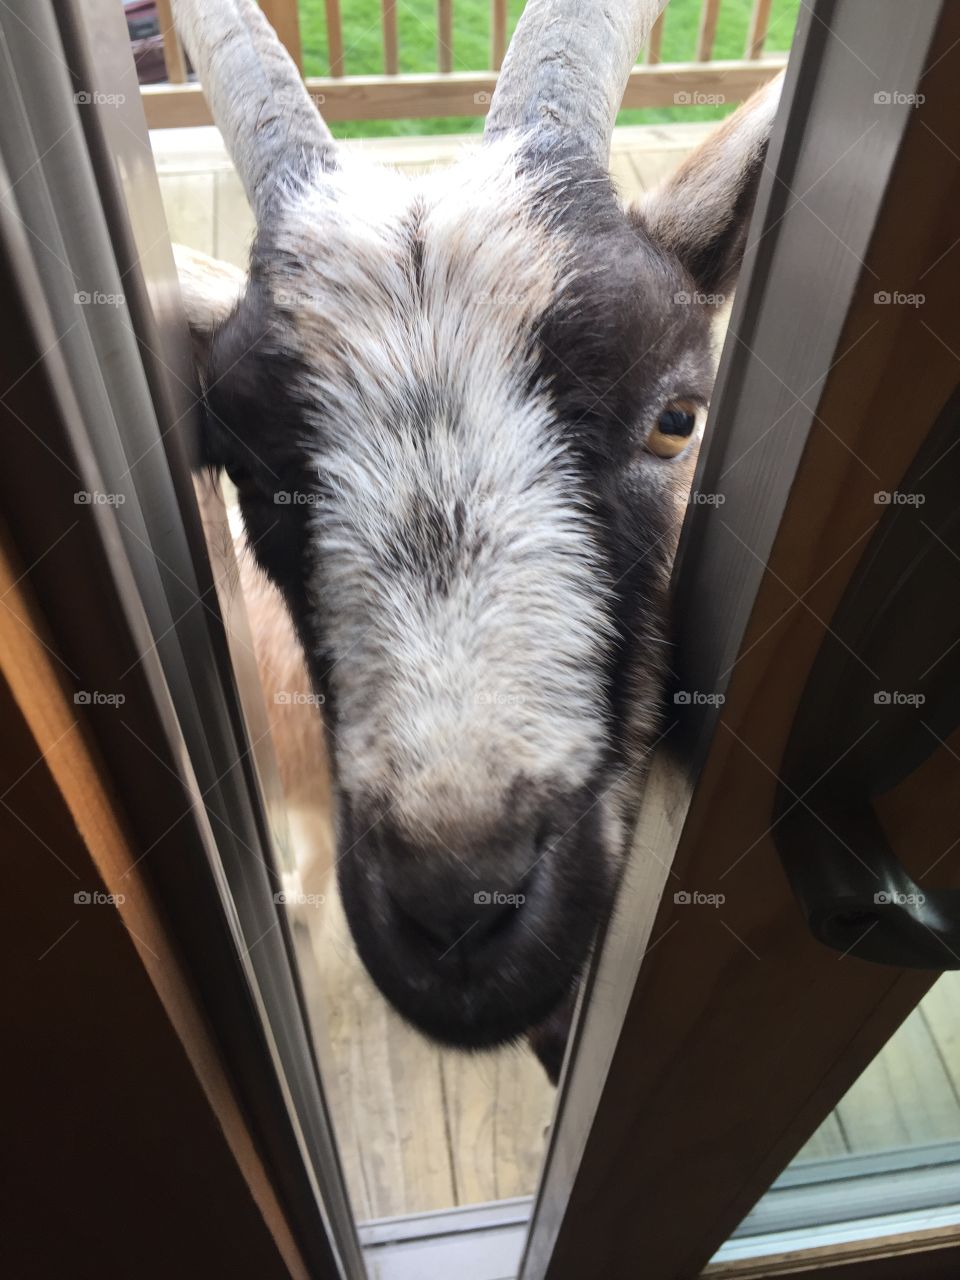 Can I come in?